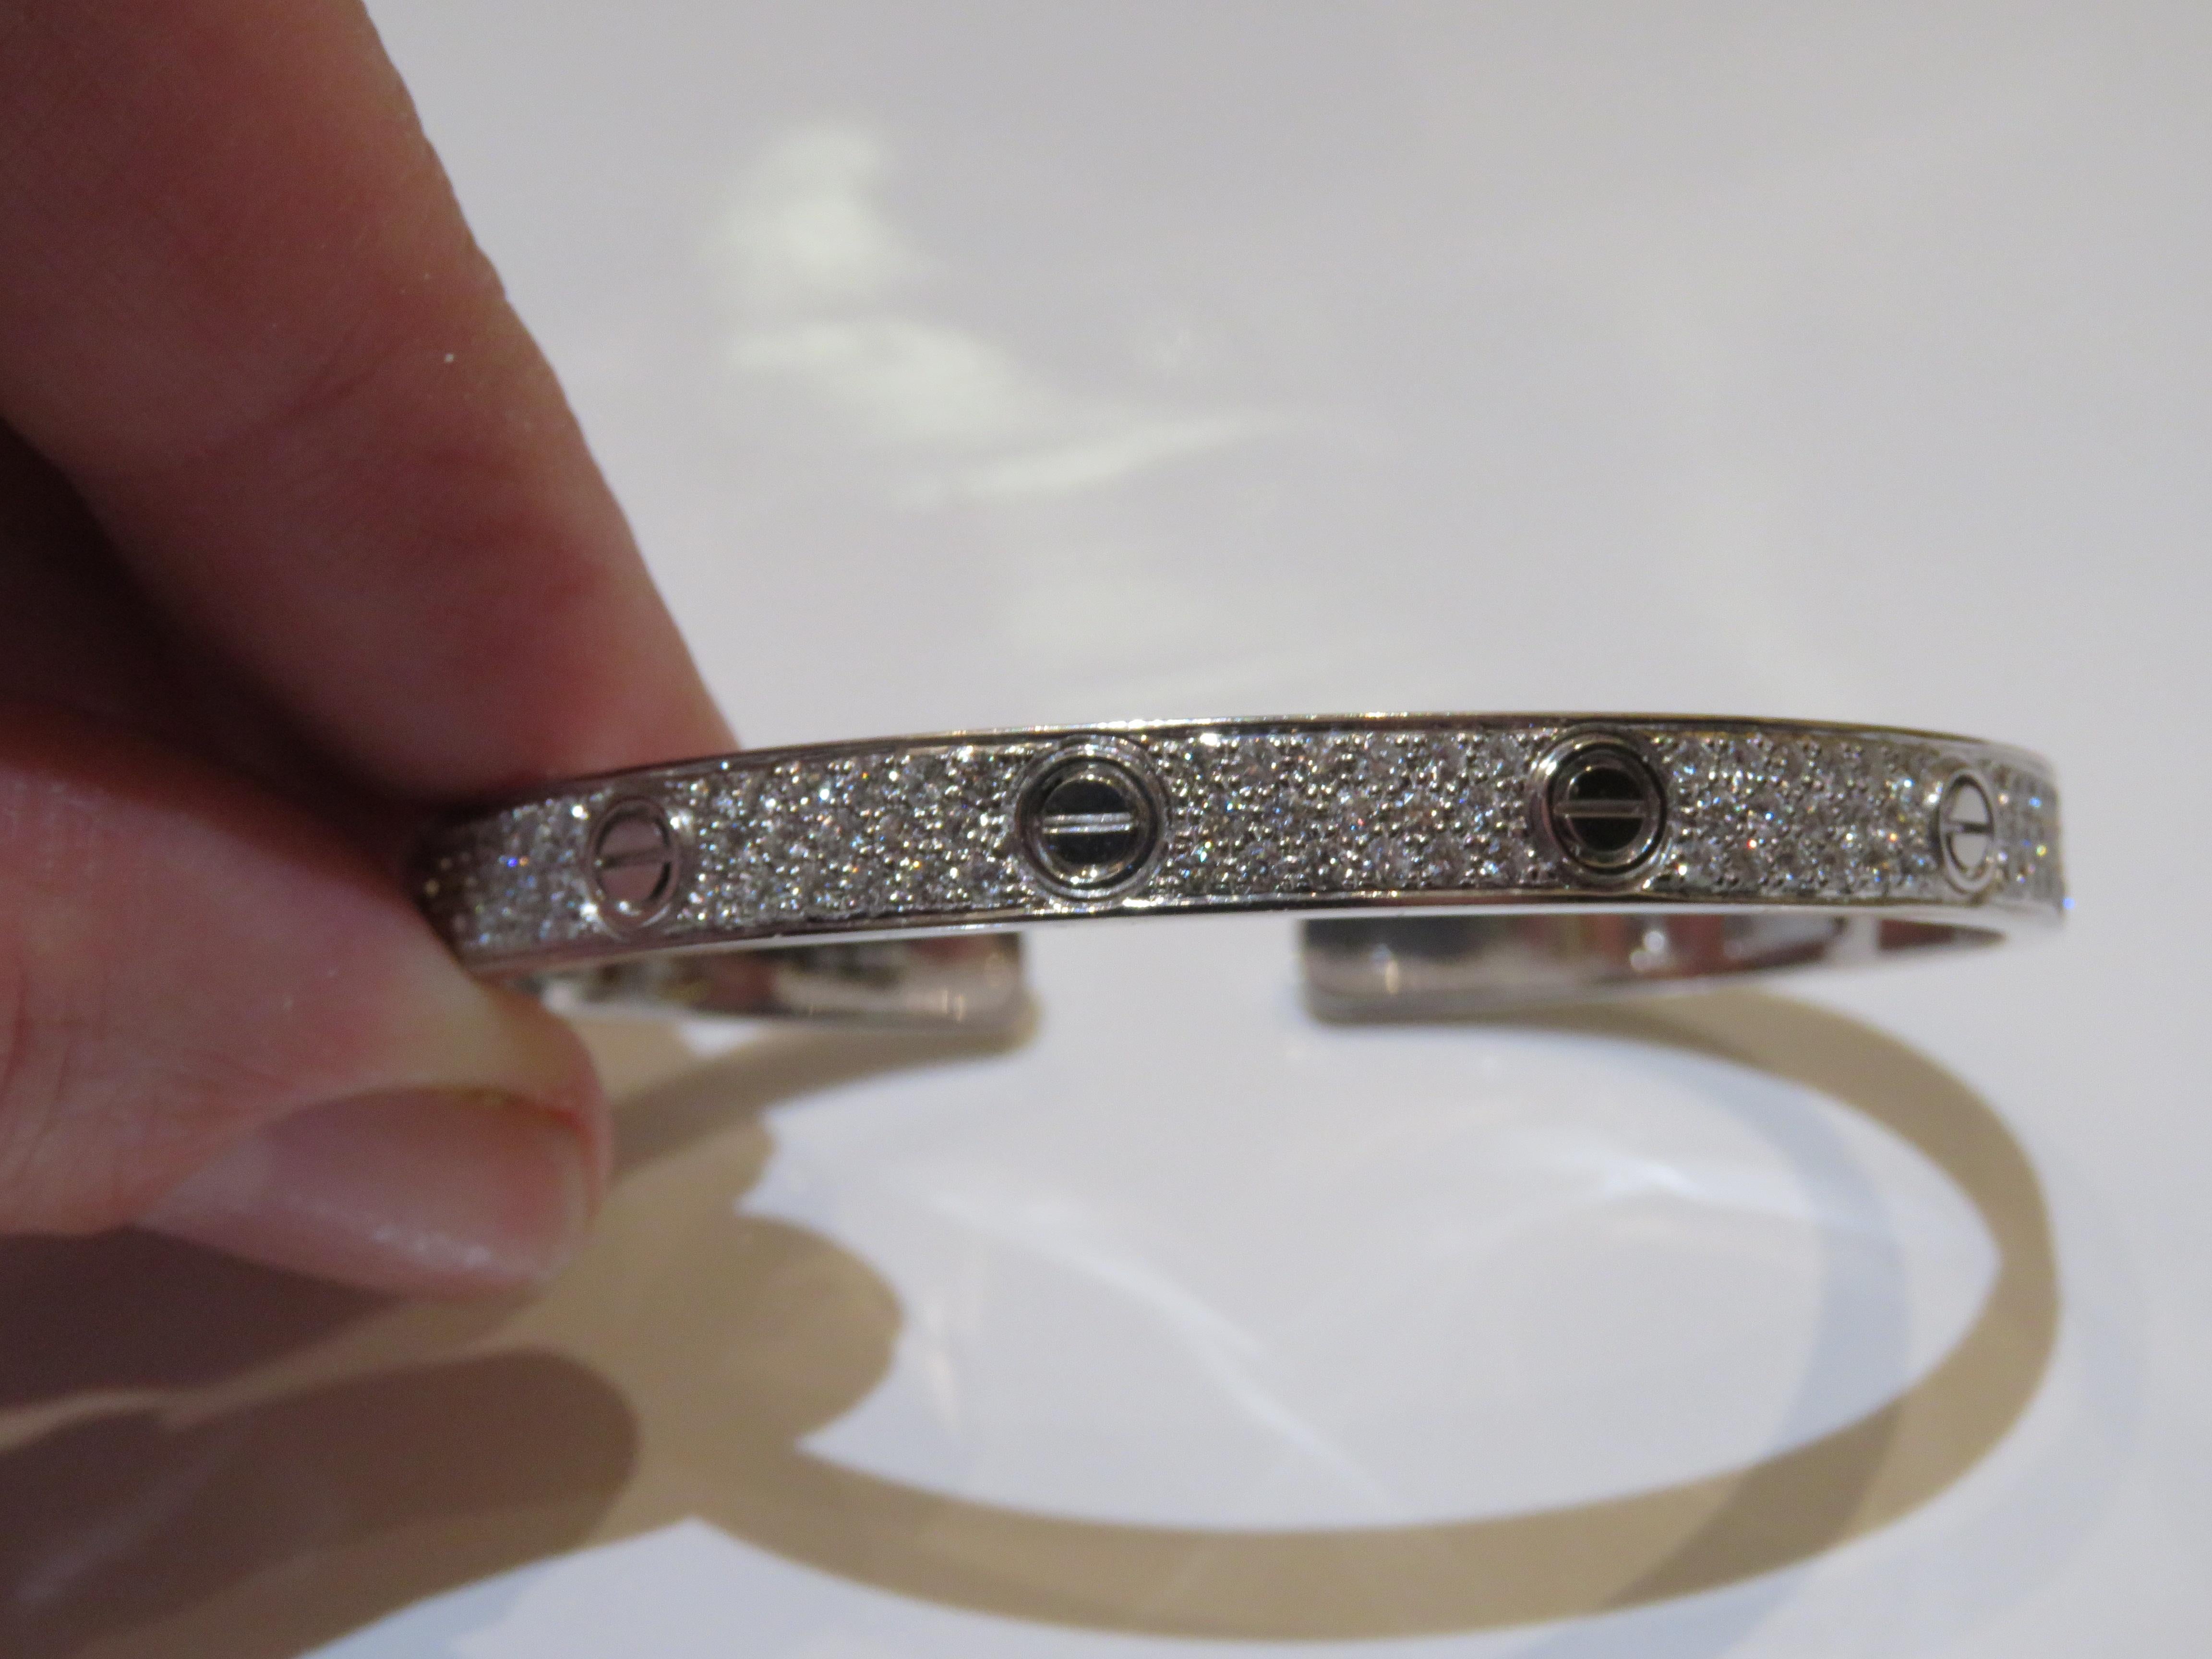 The Following Item we are offering is a Rare Pair Magnificent Radiant 18KT Gold Large Rare Gorgeous Fancy Diamond Screw Bangle Bracelets. Bracelets are comprised of Beautiful Glittering Rows of Gorgeous Diamonds with Screws!!! T.C.W. Approx